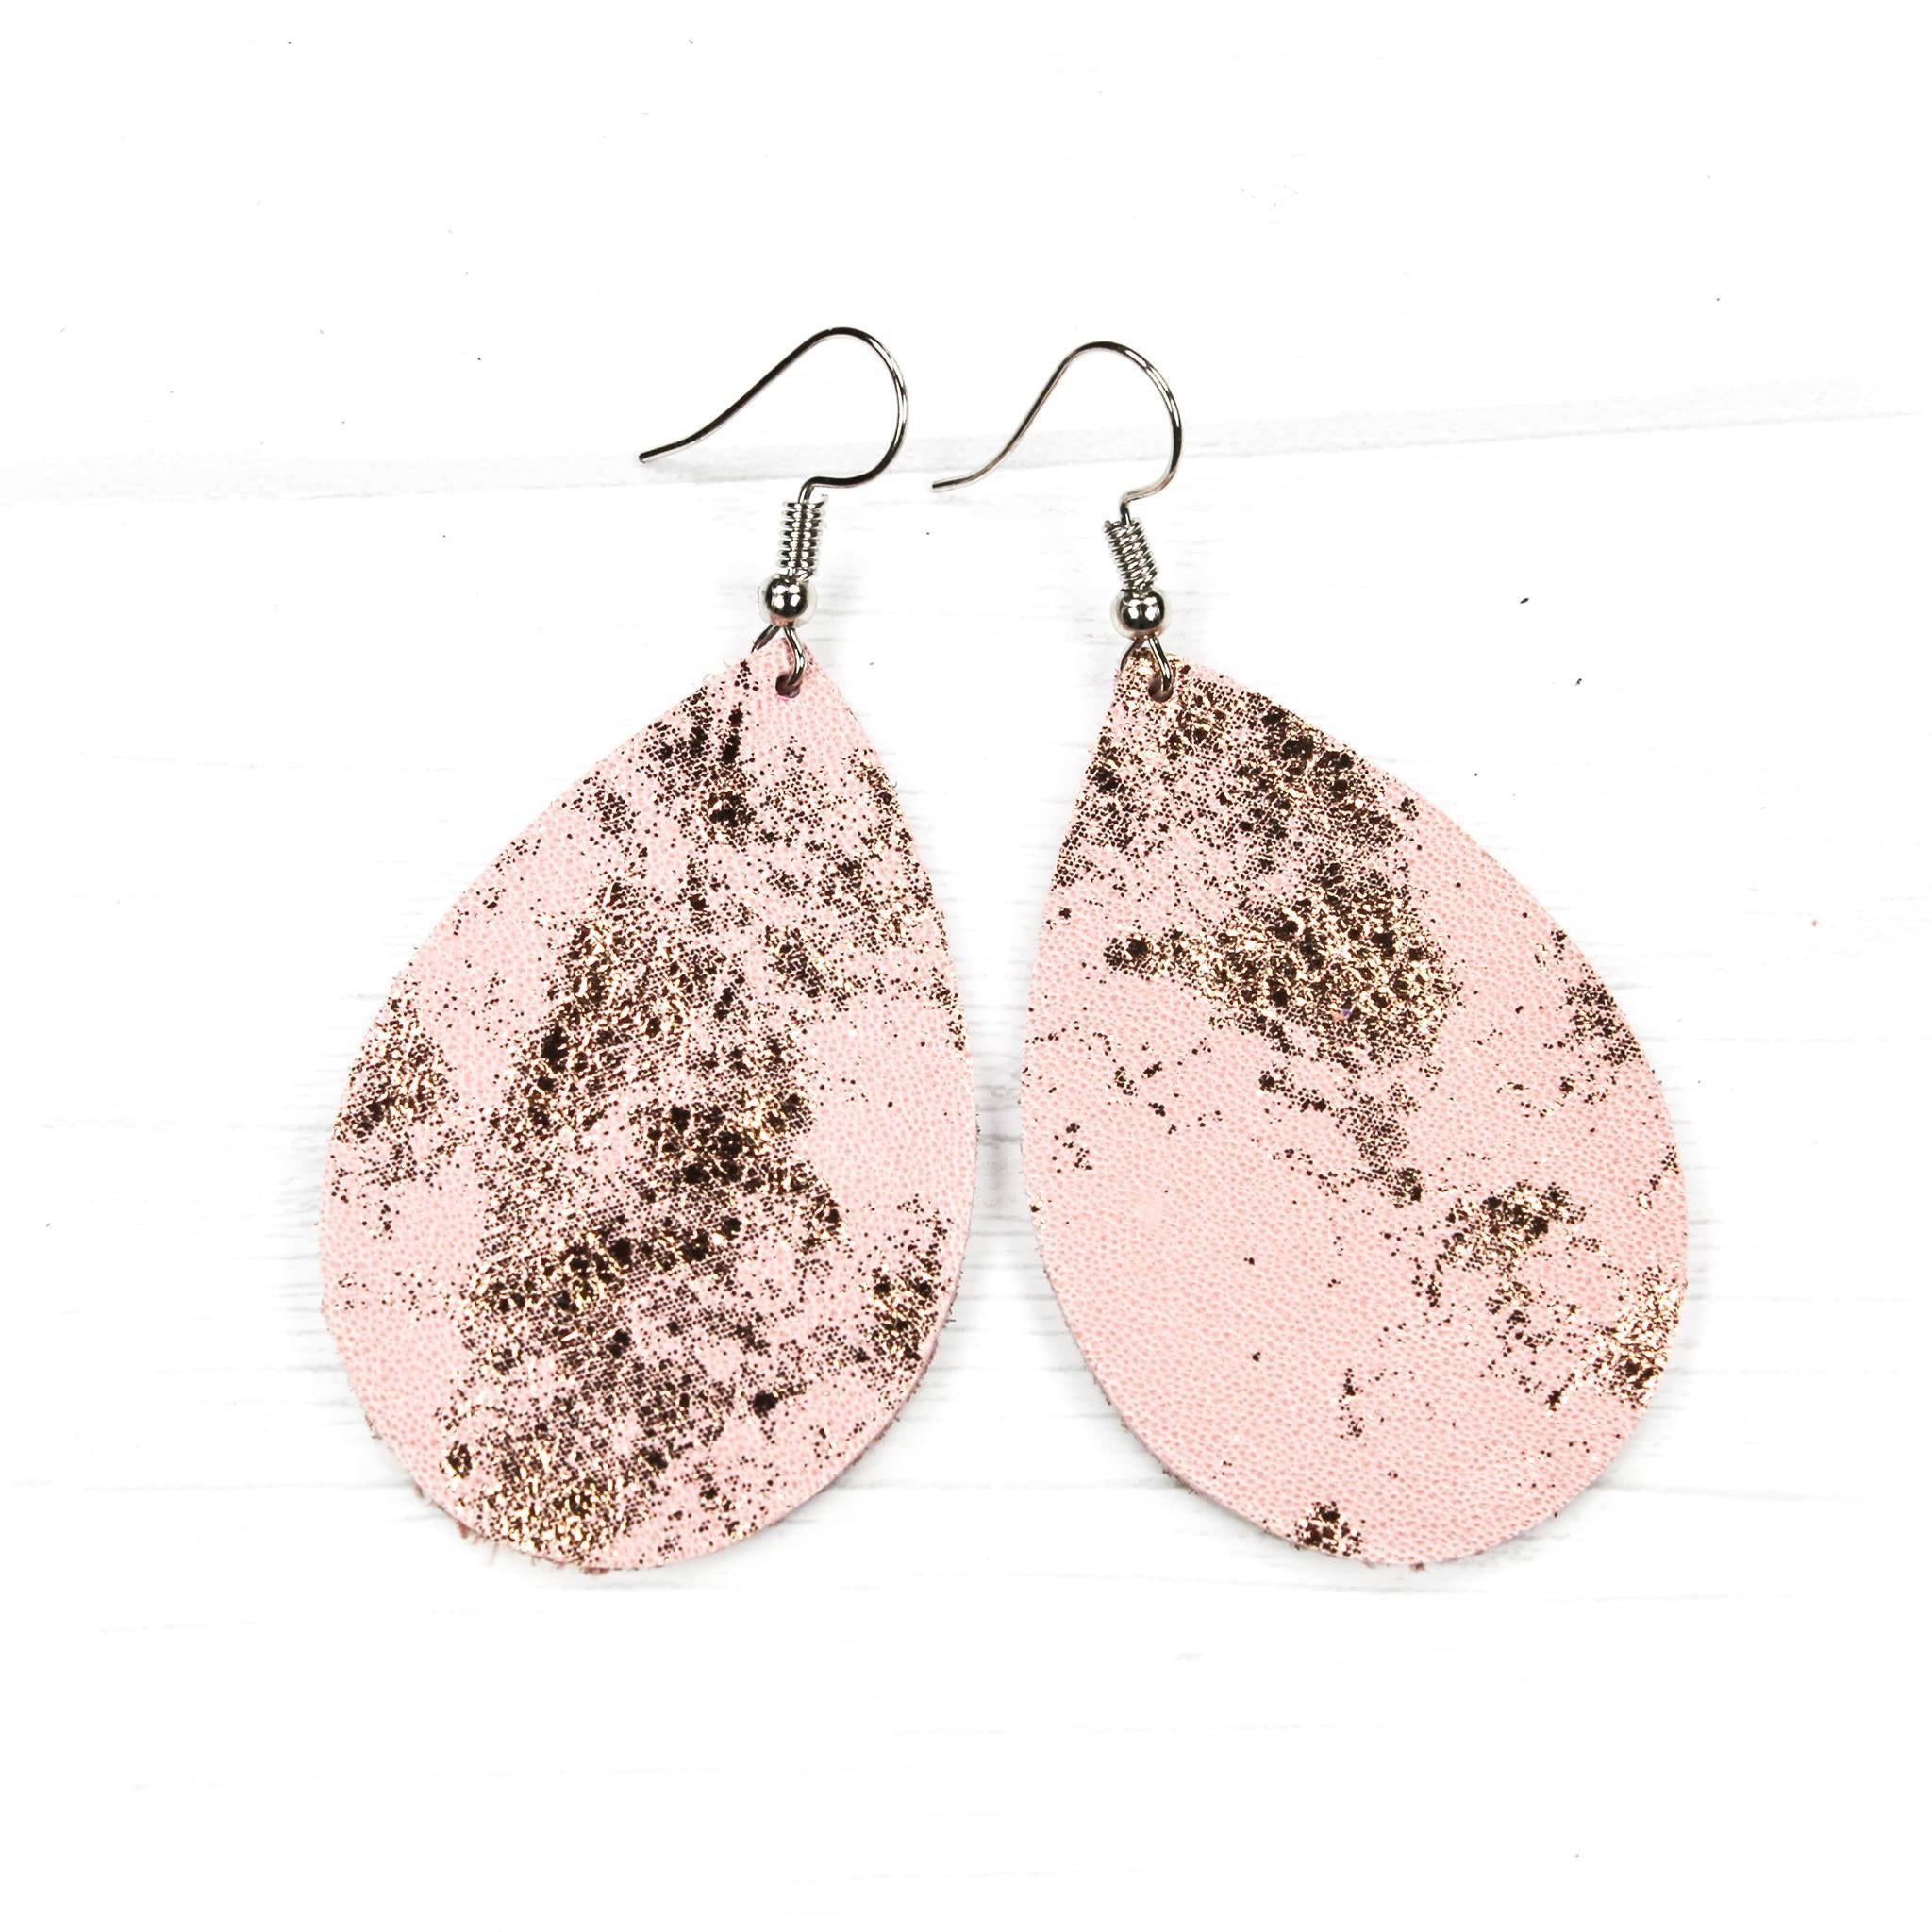 Blushing for You Leather Earrings